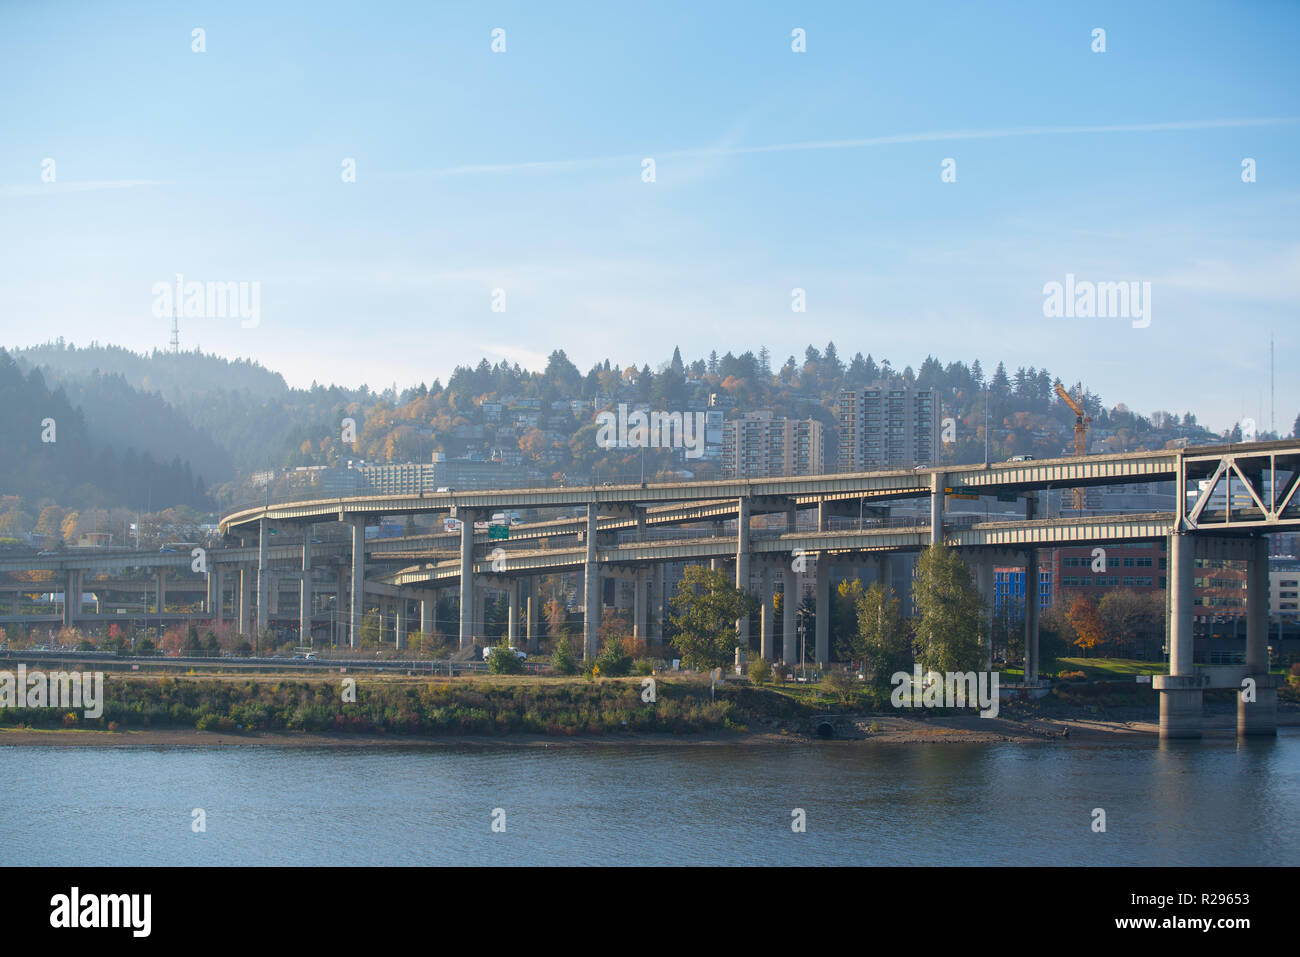 Portland, OR / USA - November 15 2018: Landscape with Portland highway bridges splitting into different directions over the Willamette river. Stock Photo